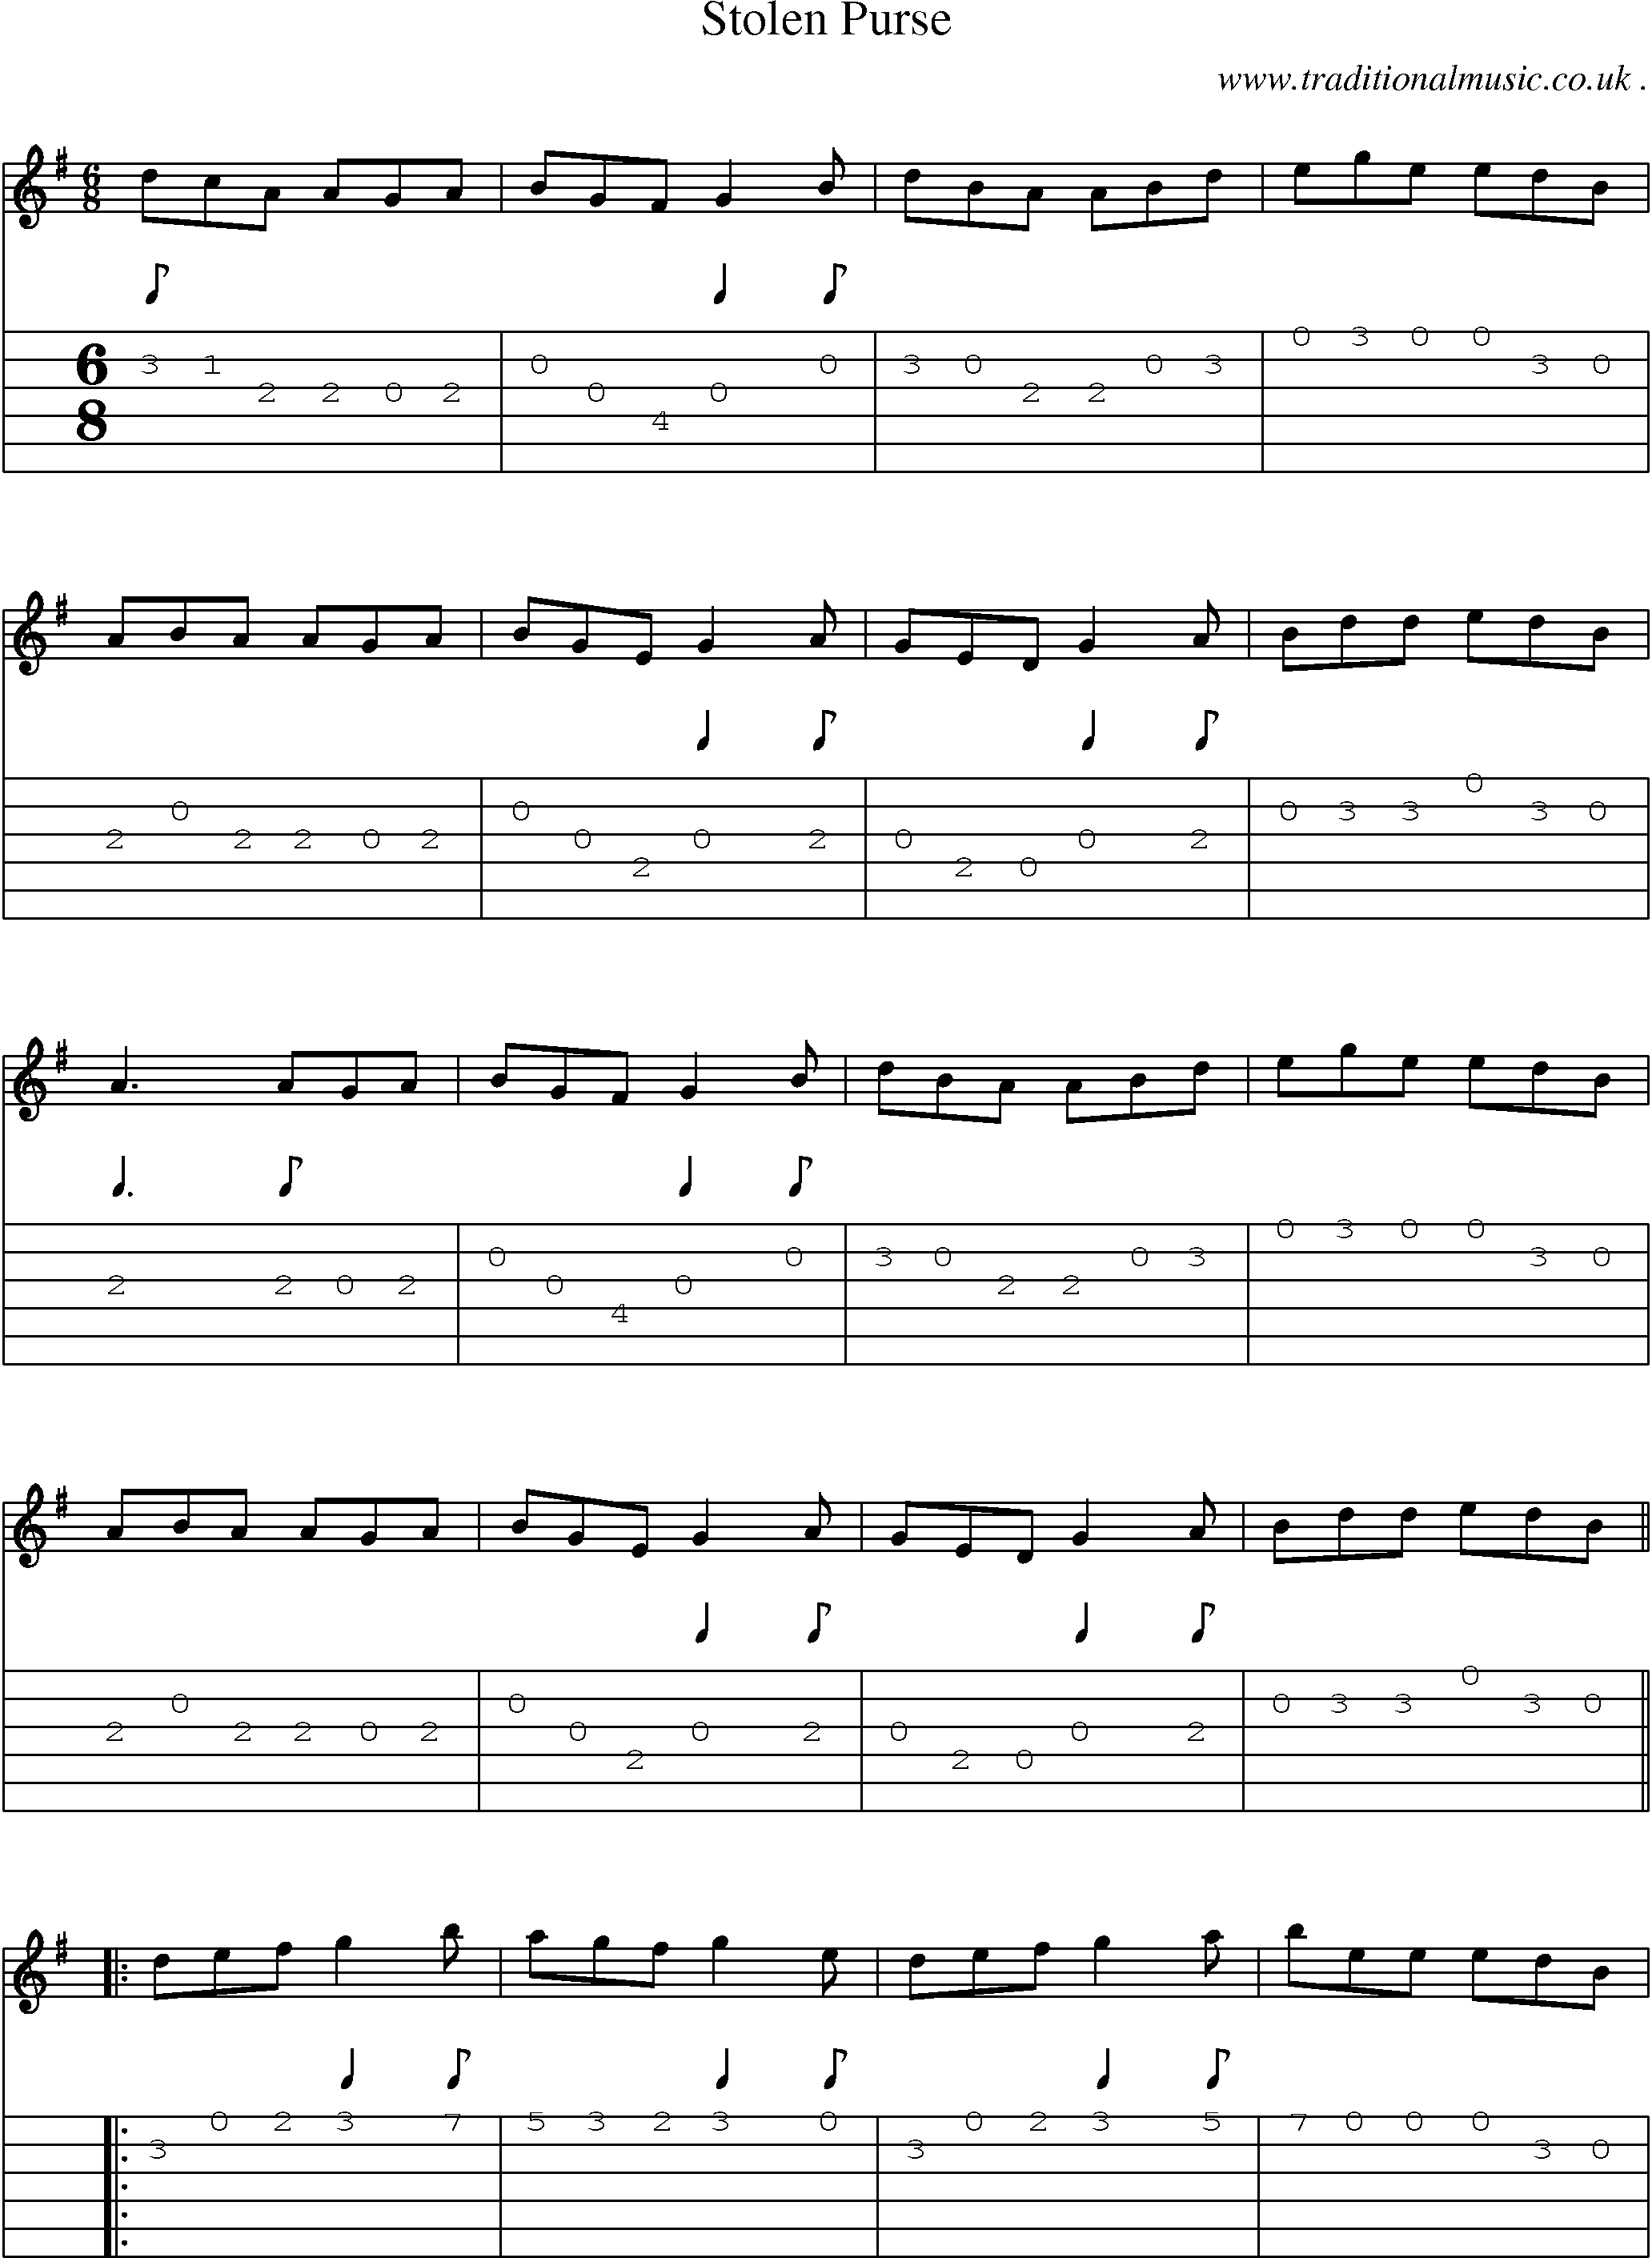 Sheet-Music and Guitar Tabs for Stolen Purse